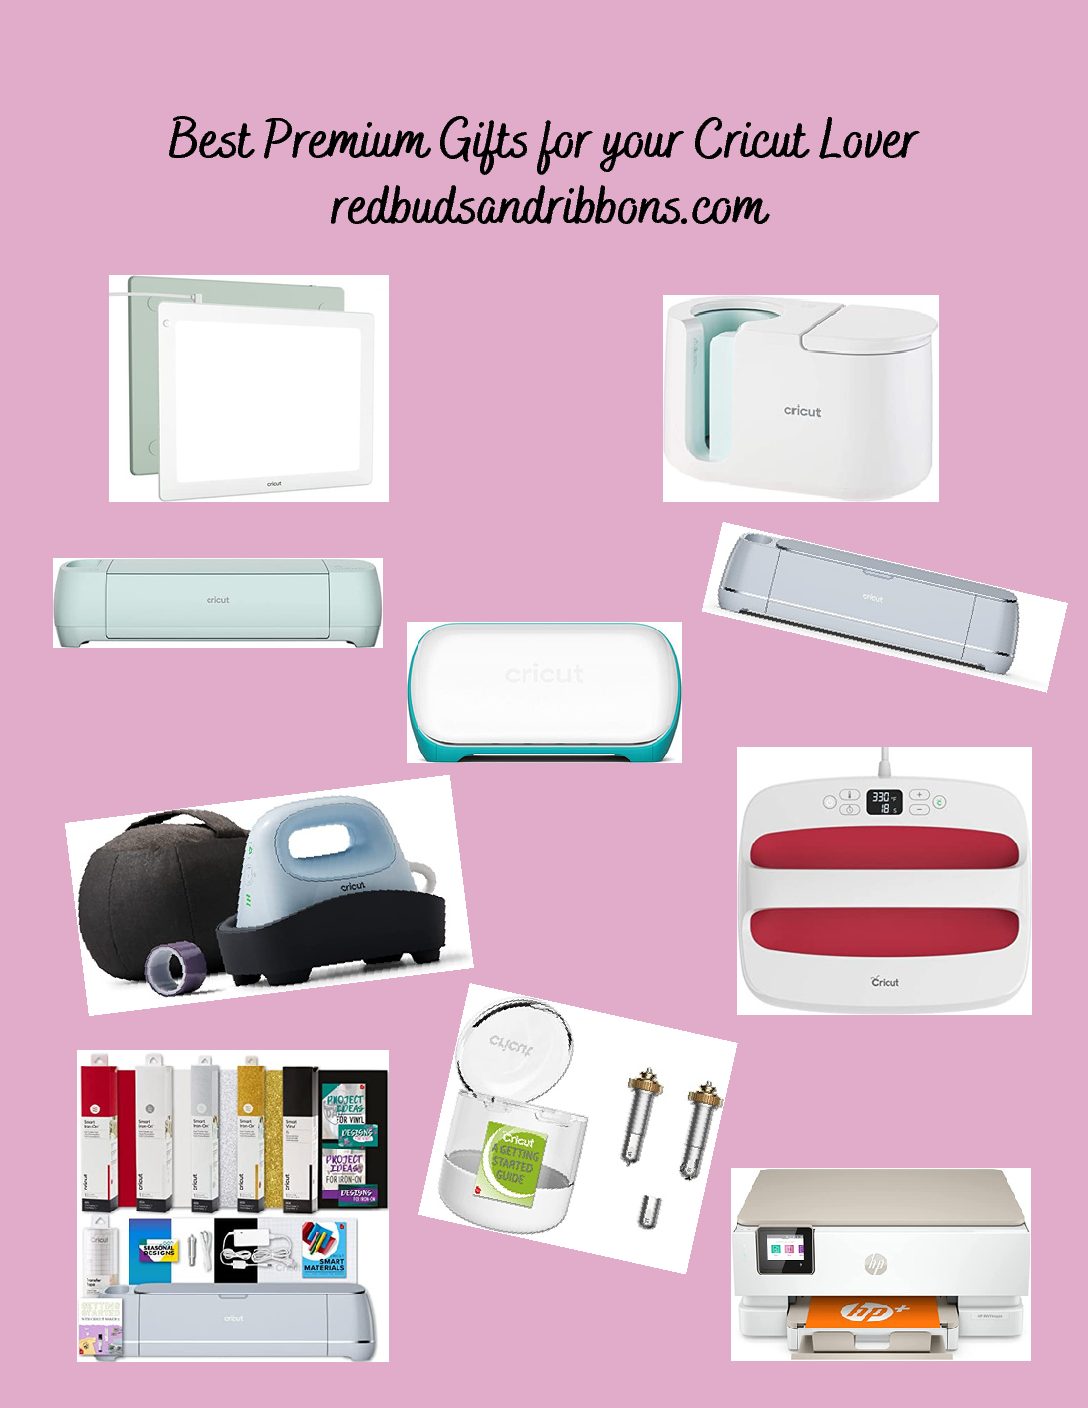 Best Premium Gifts for your Cricut Lover